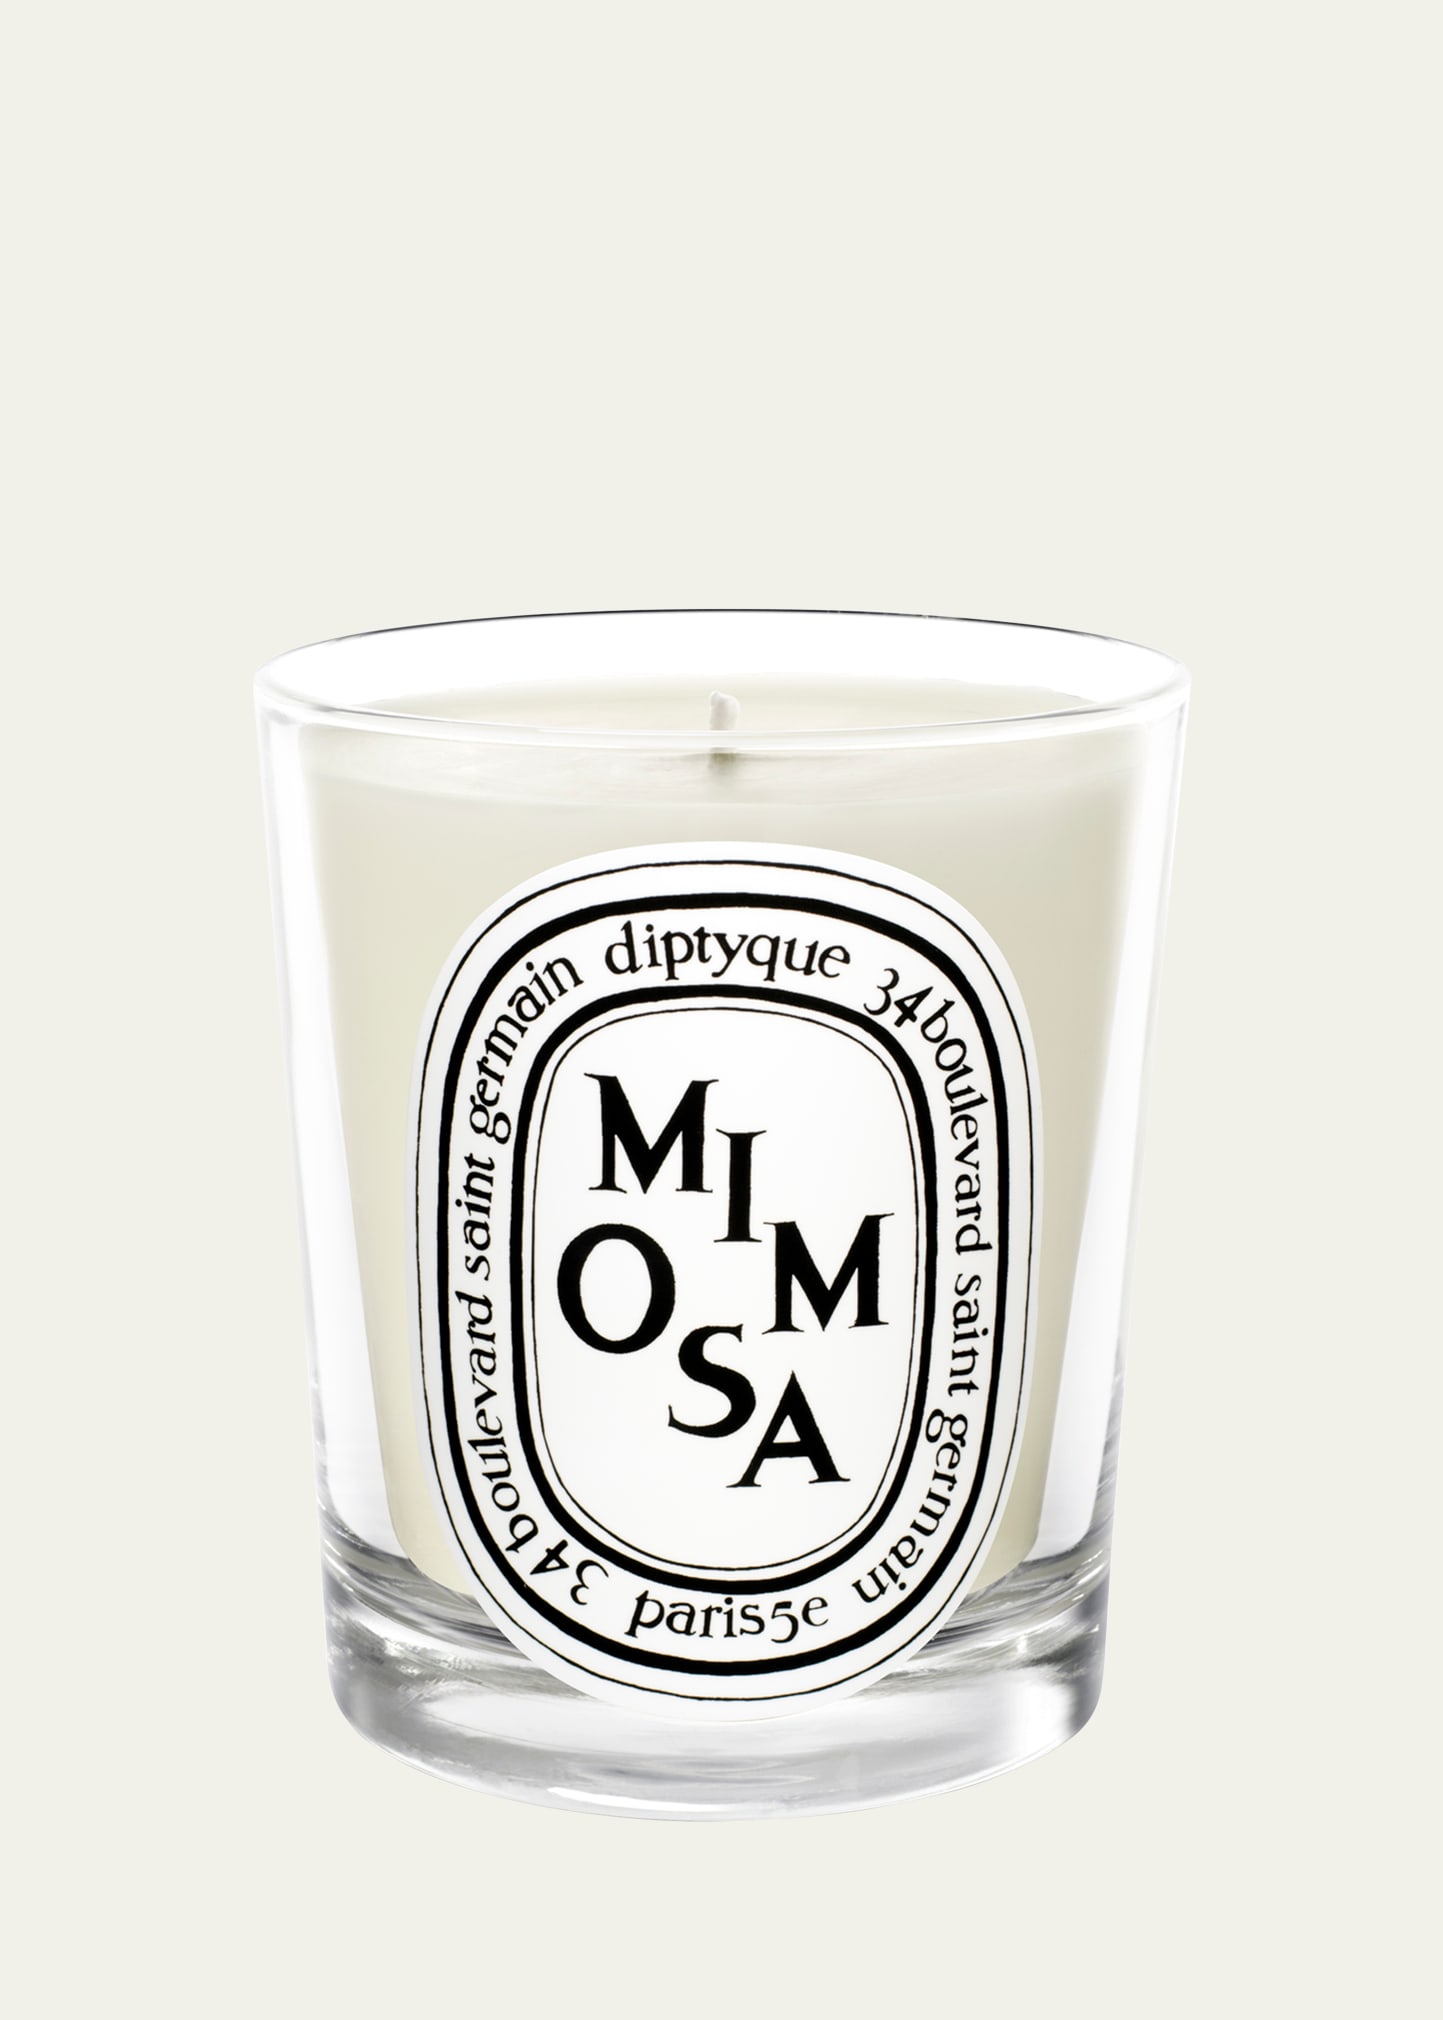 Mimosa Scented Candle, 6.5 oz.